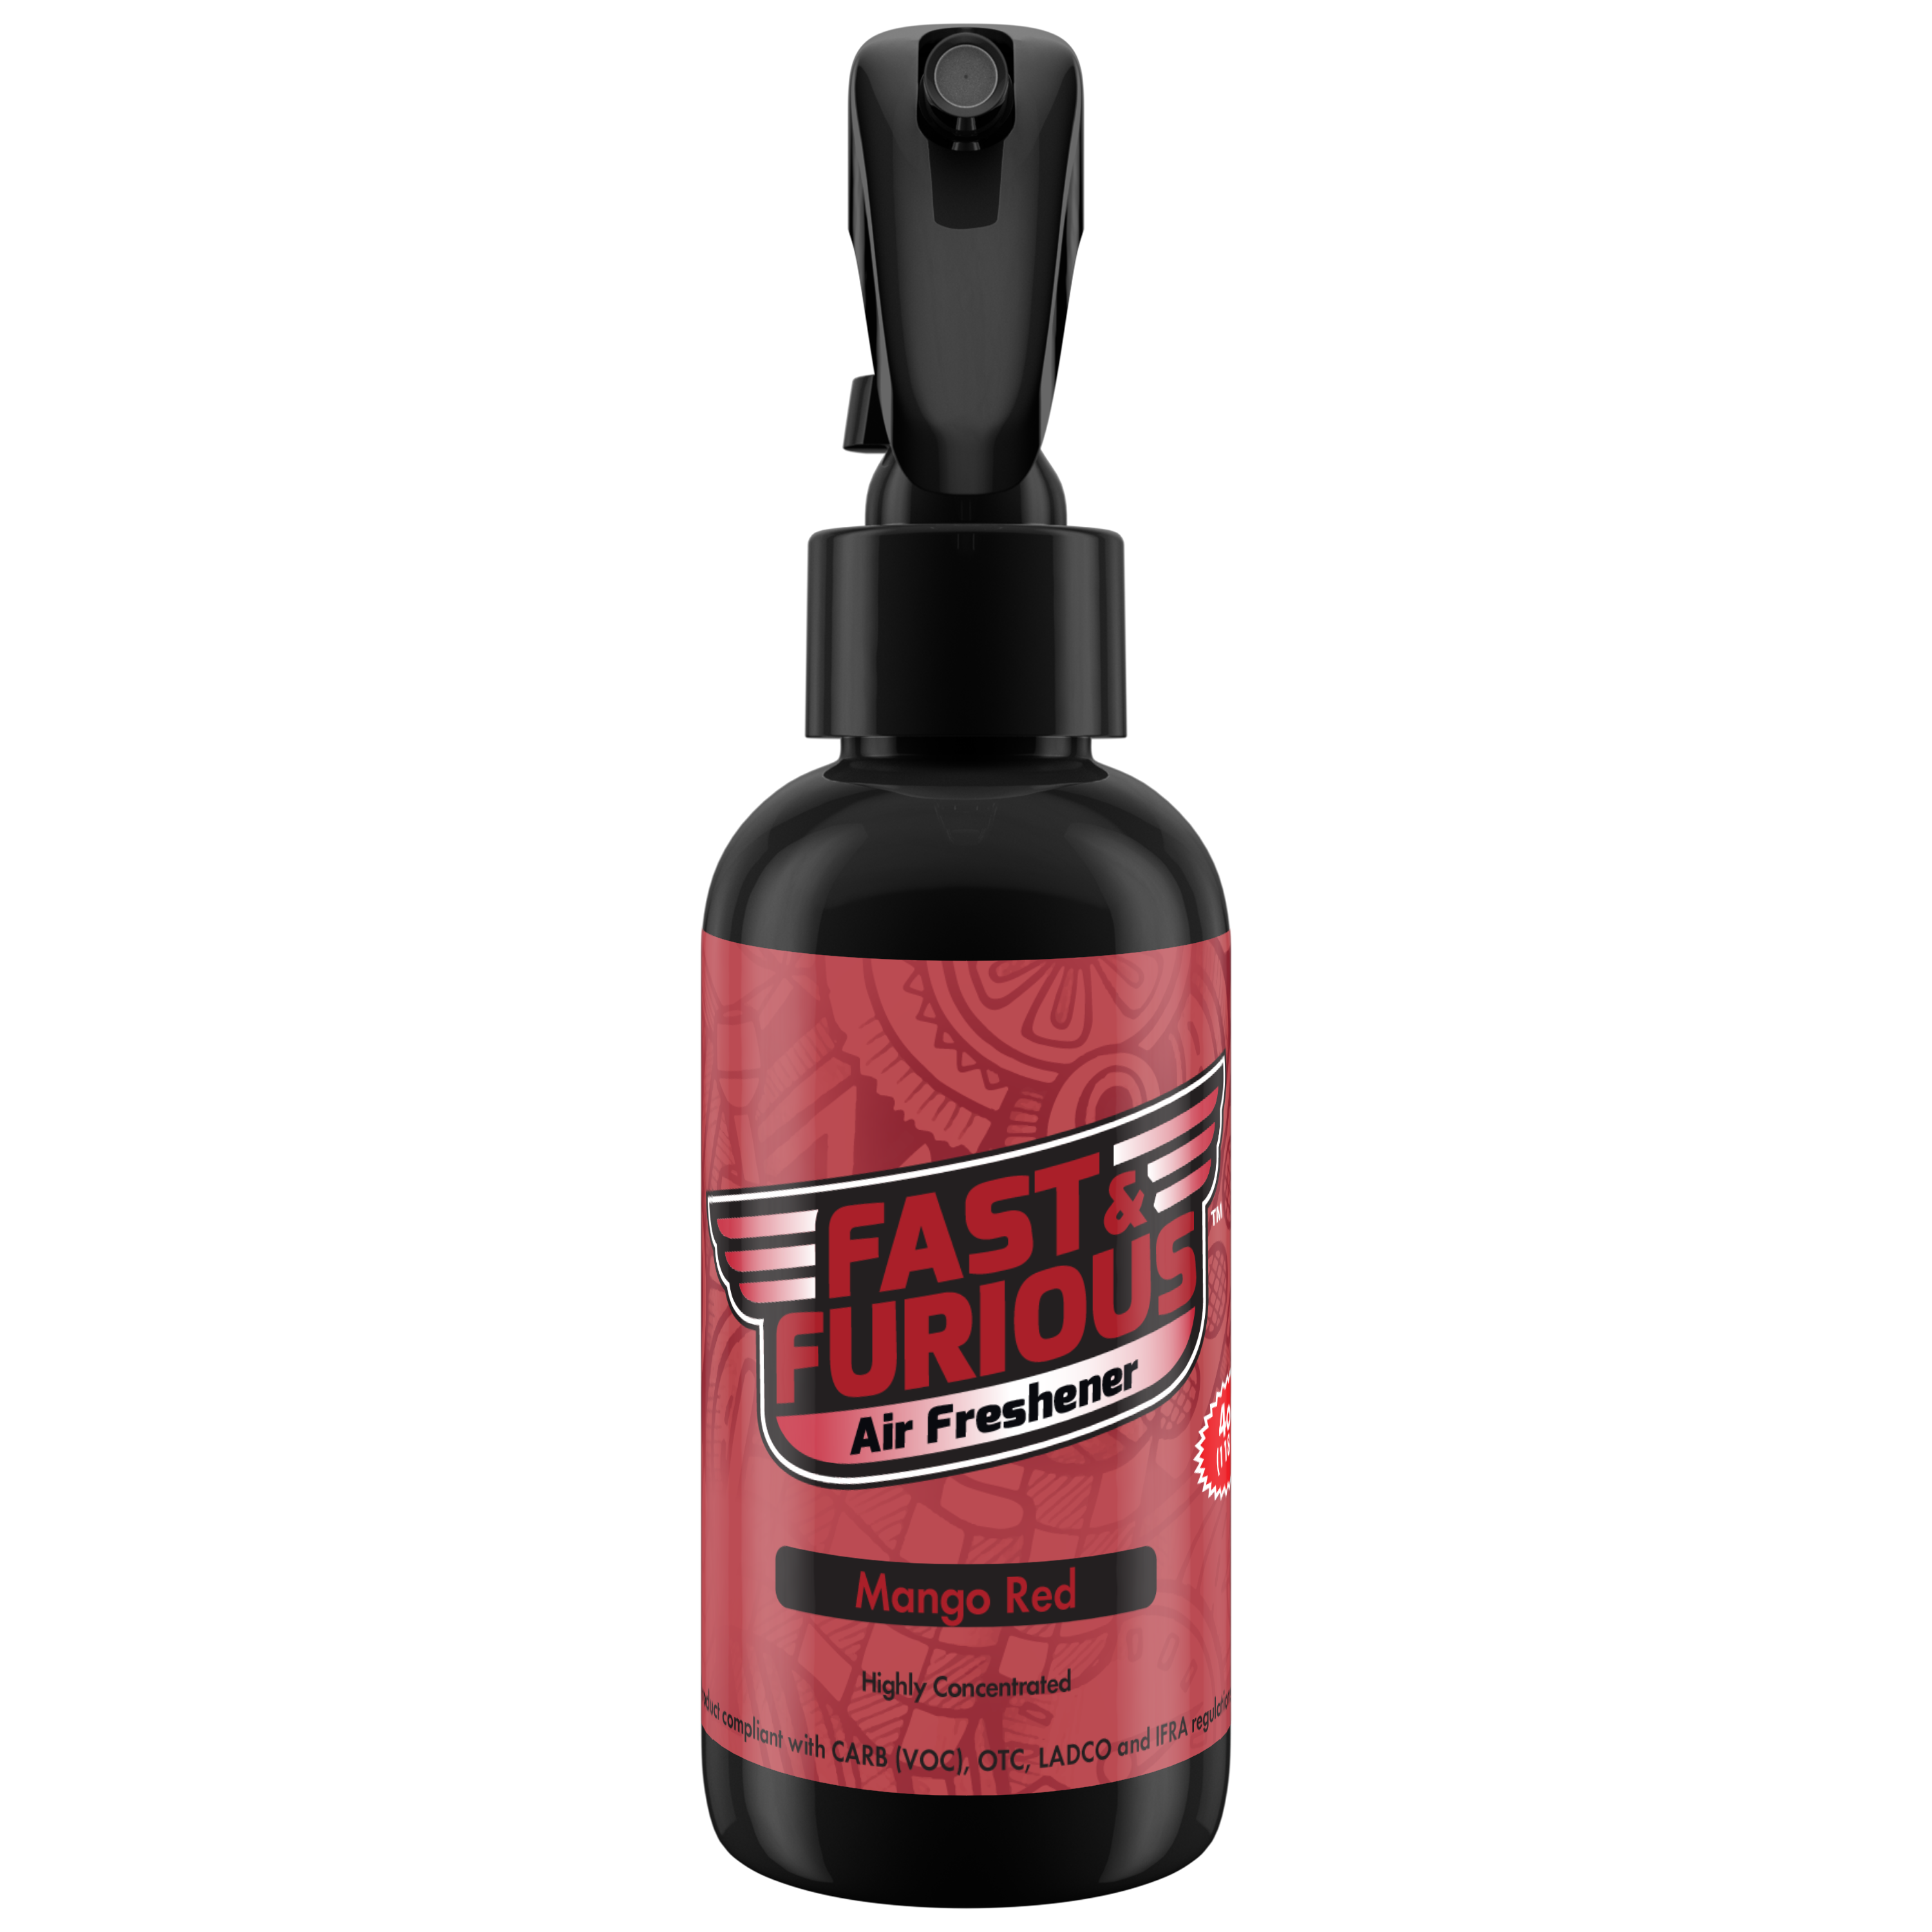 Fast and Furious Air Freshener - Mango Red Scent